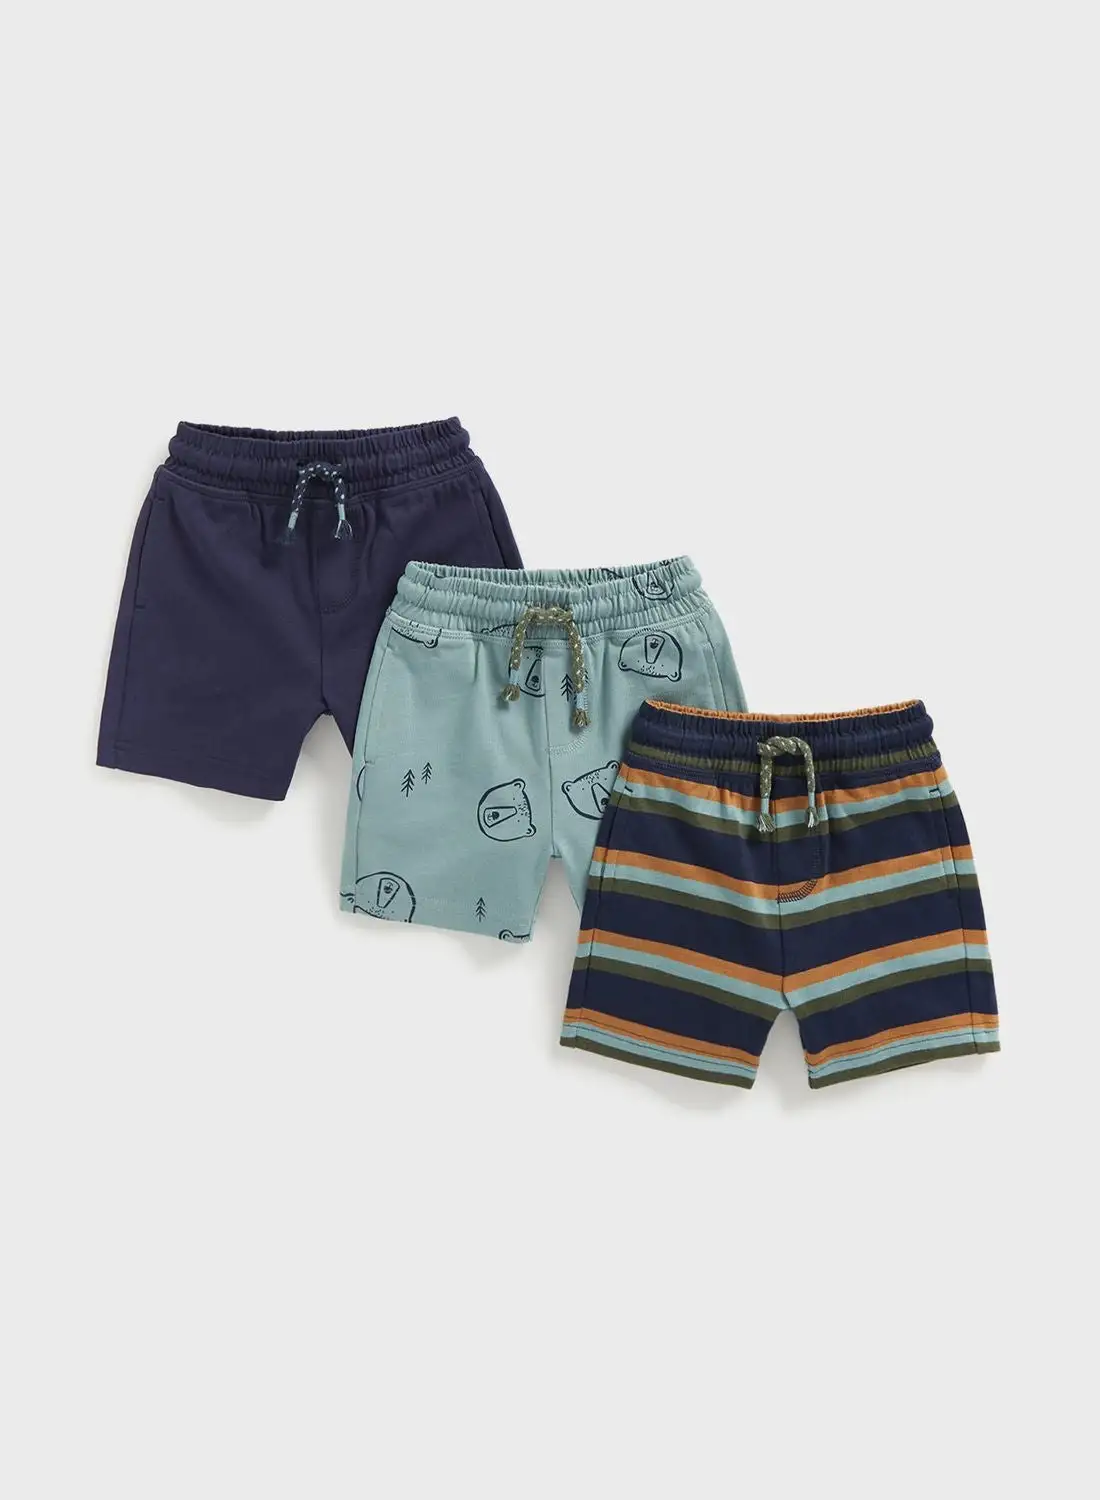 mothercare Infant 3 Pack Assorted Shorts